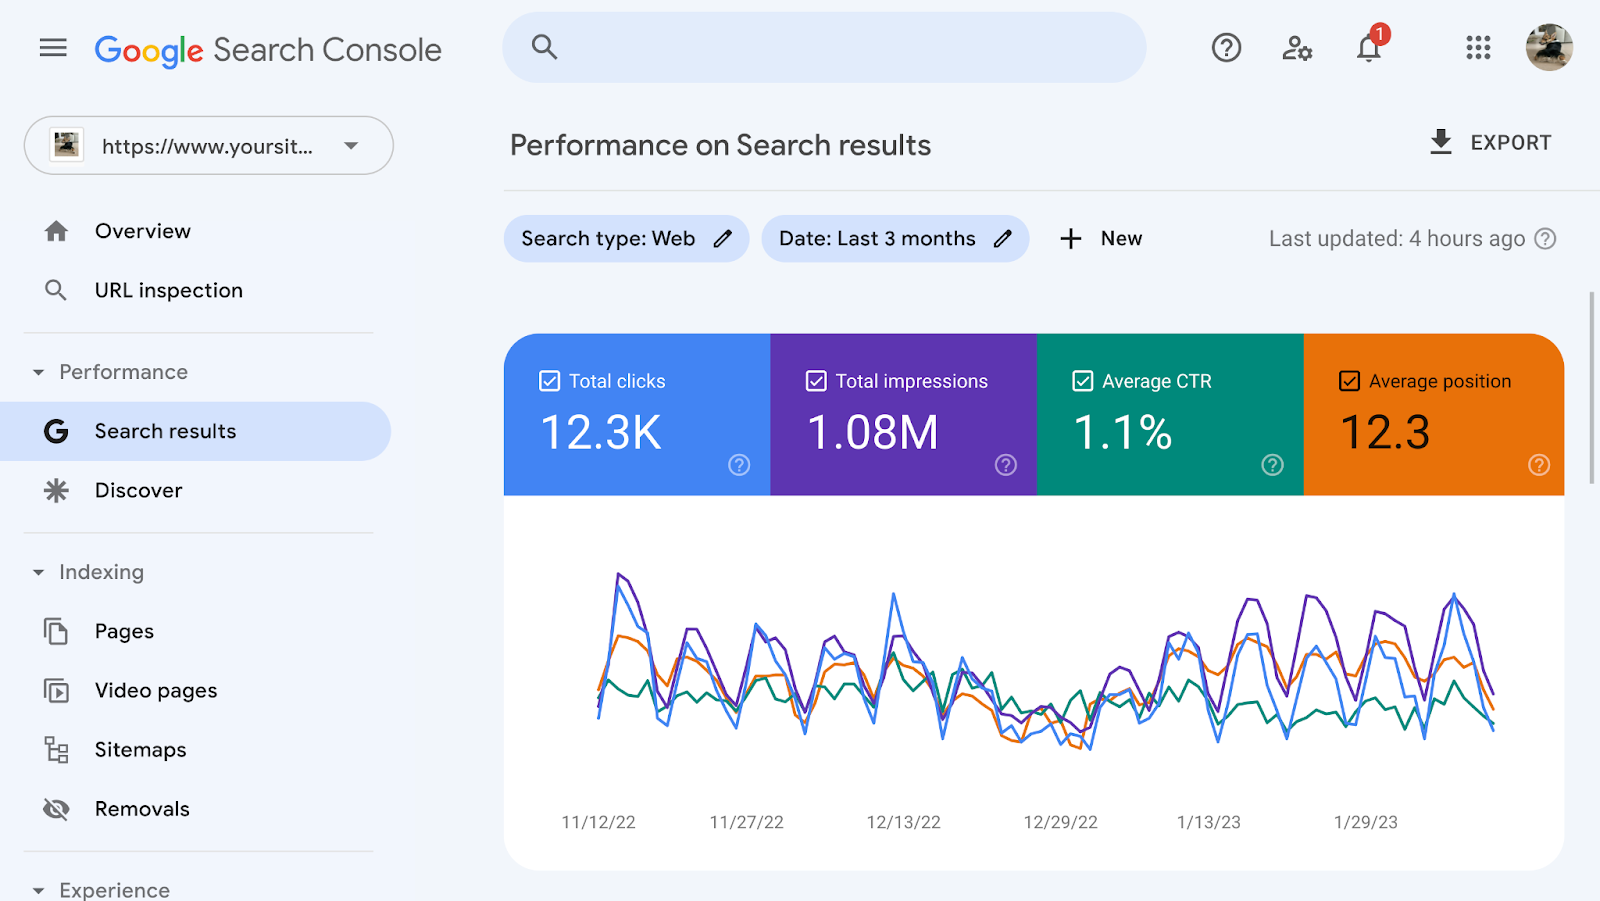 Google Search Console : Performance Report

